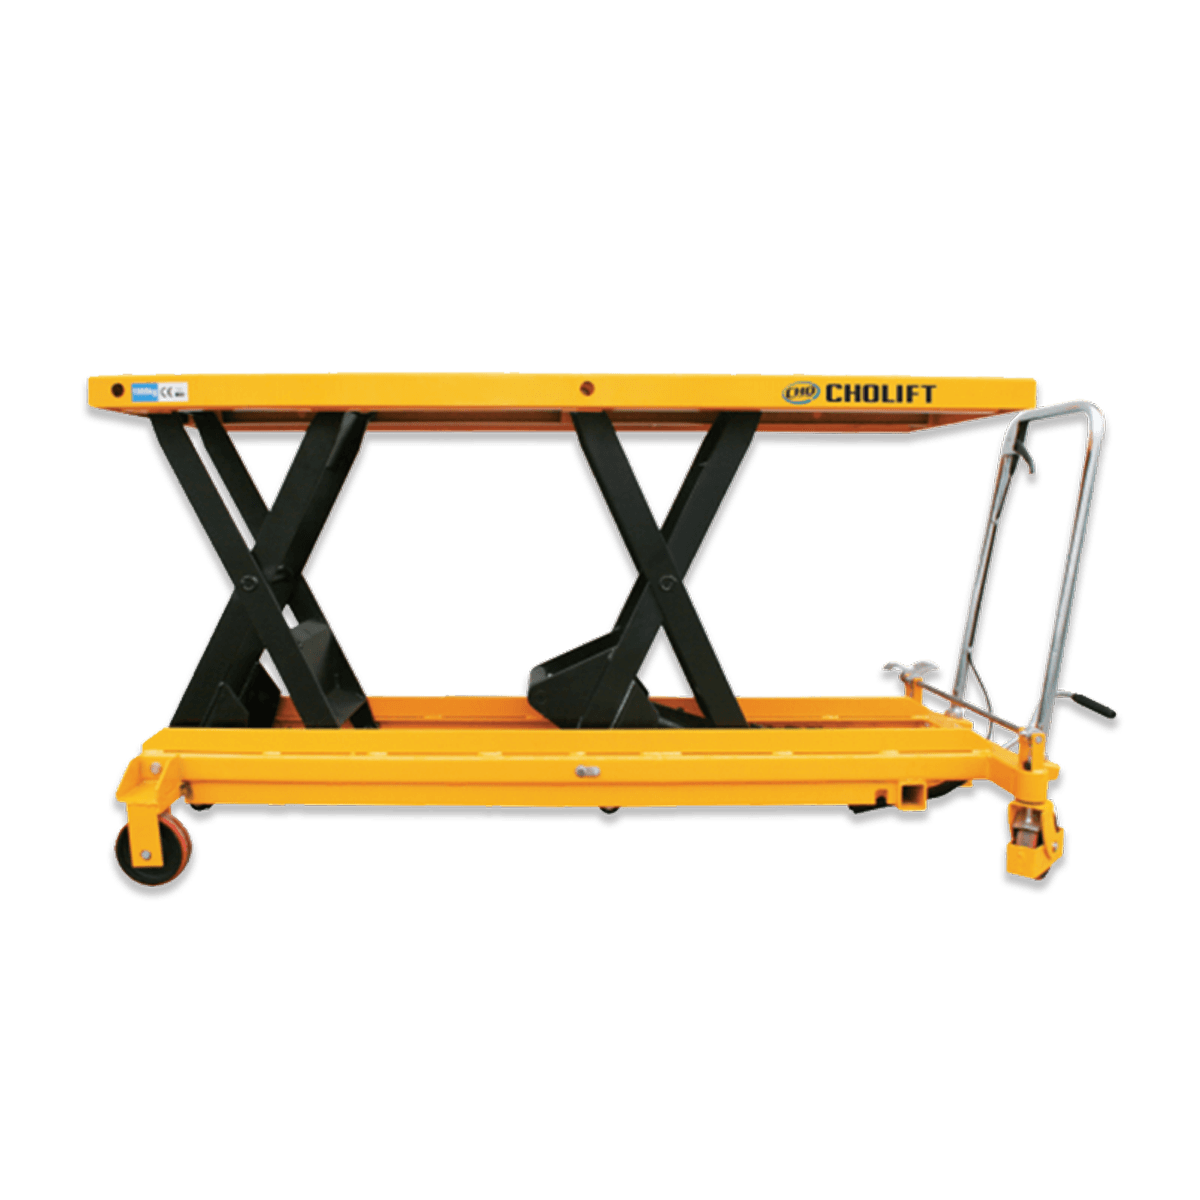 WIDE HYDRAULIC TABLE LIFT